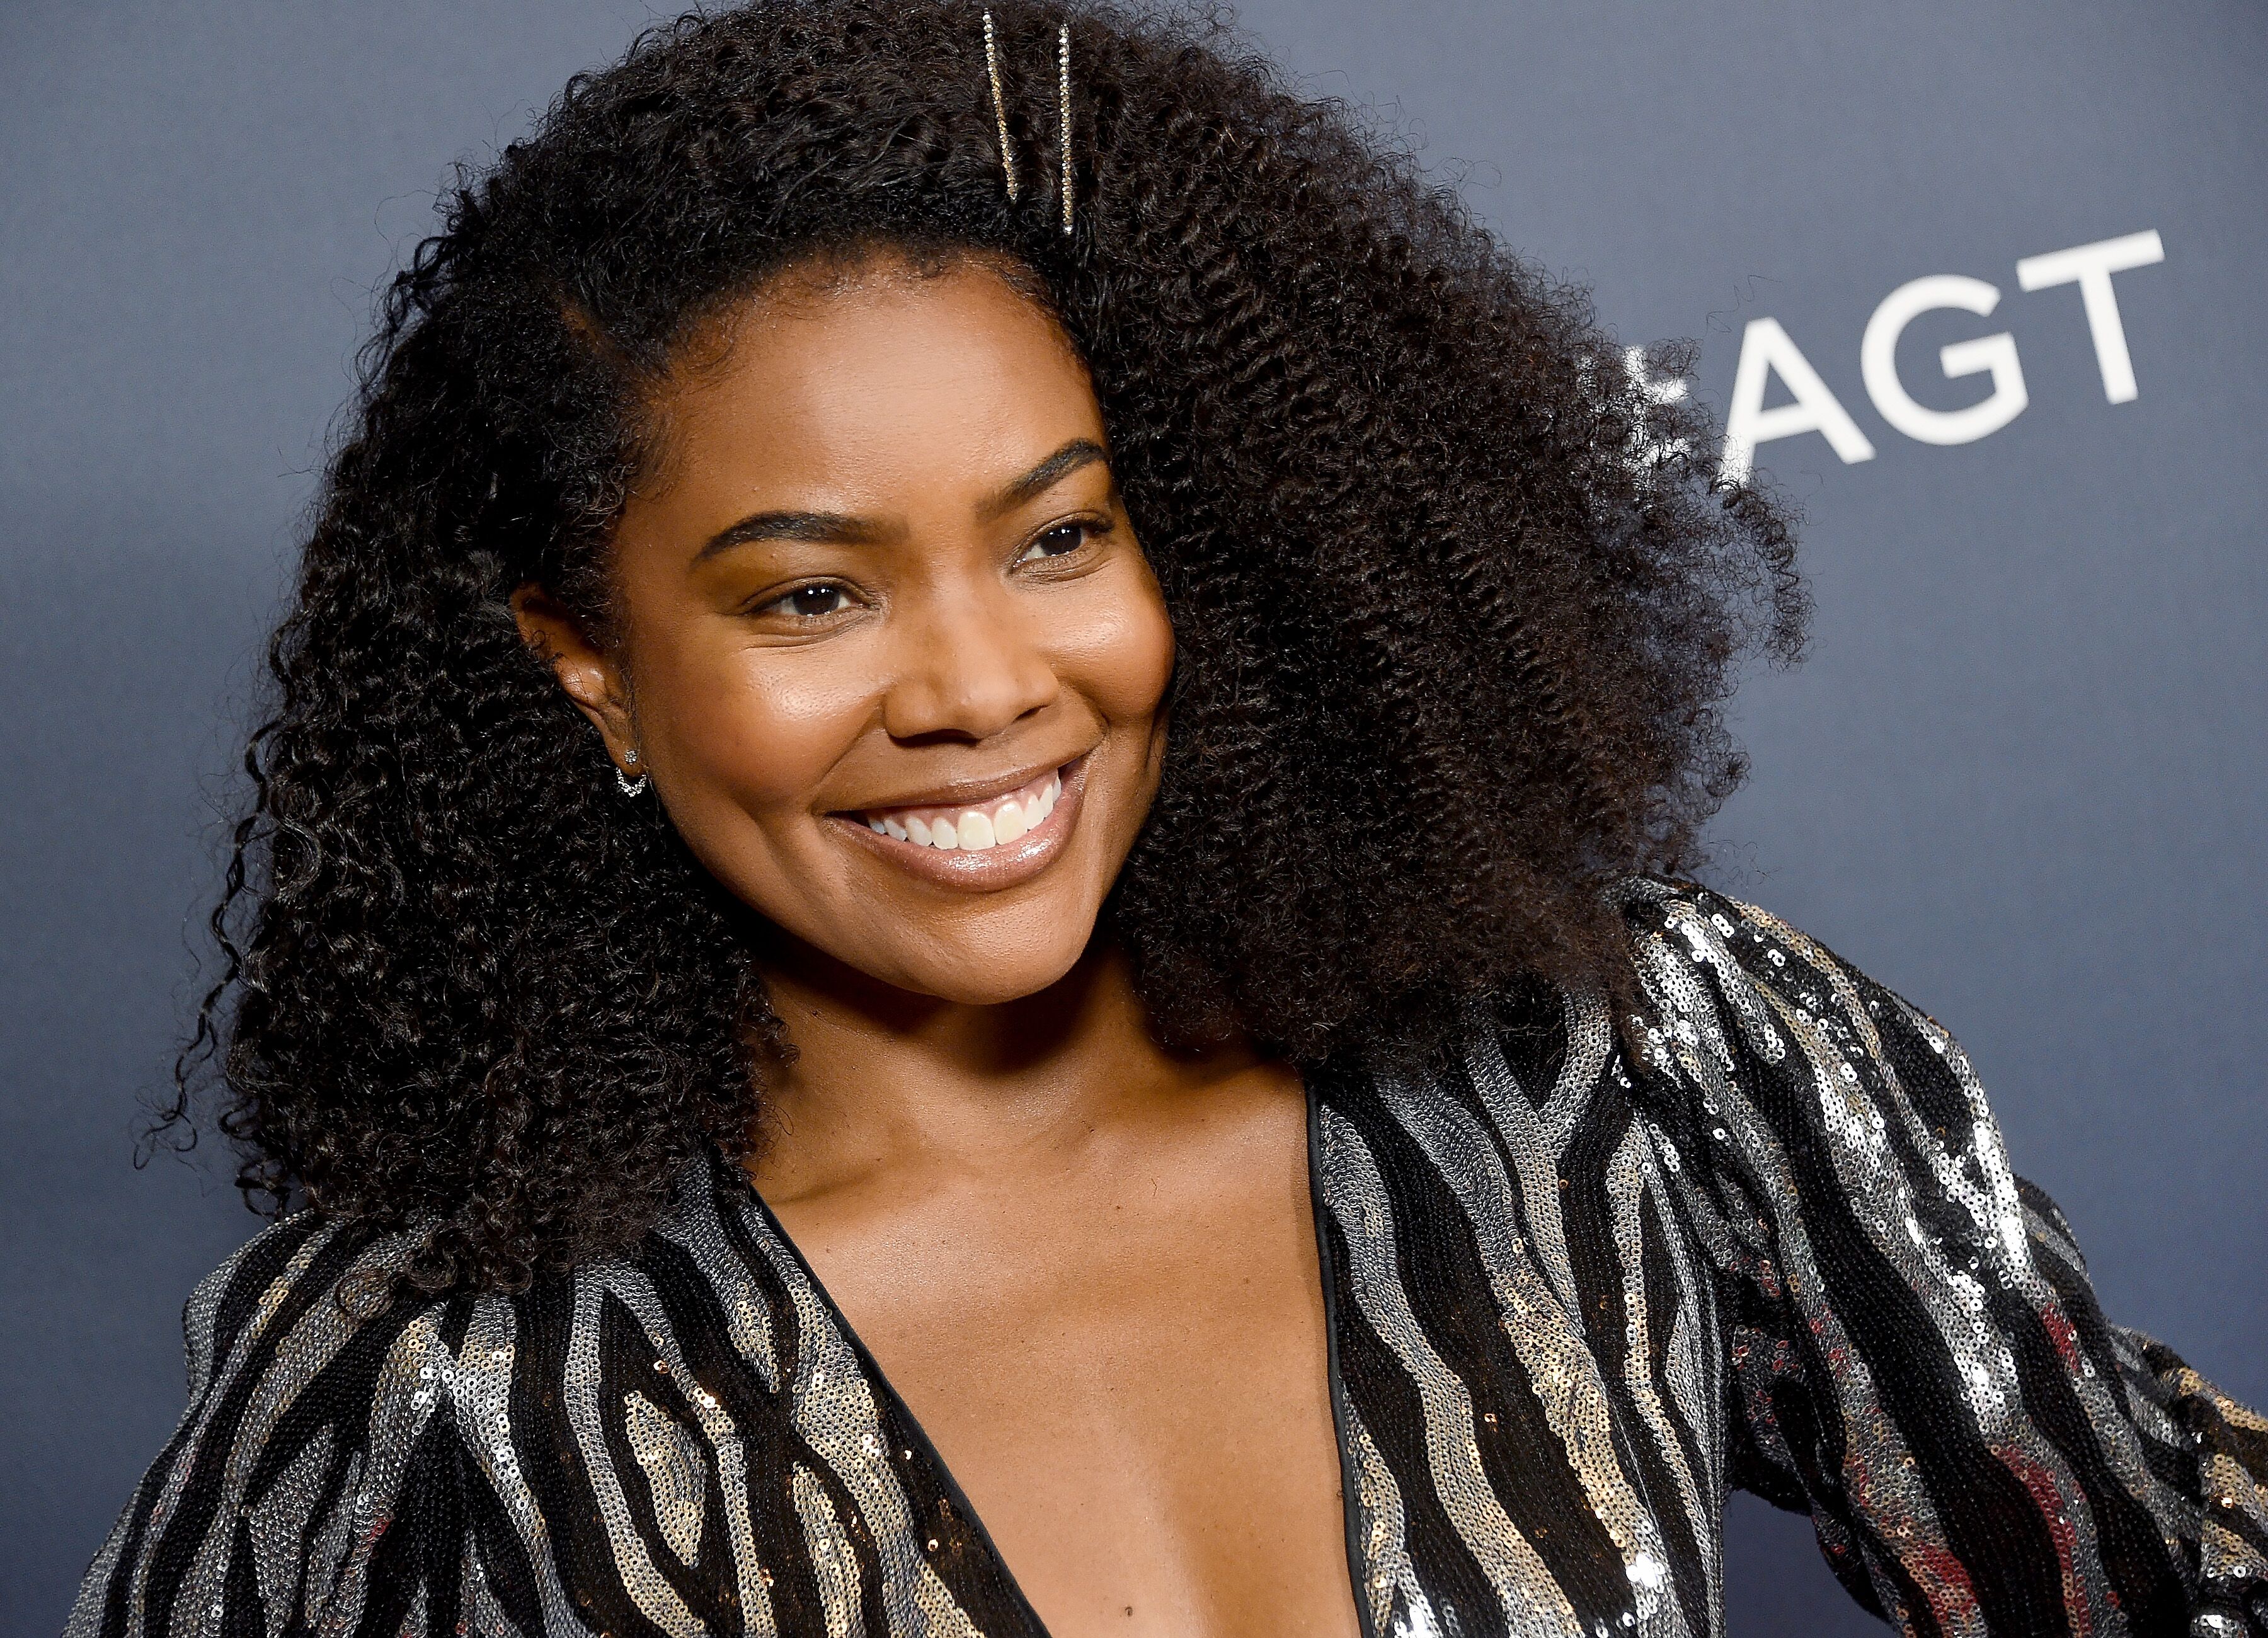 Former "America's Got Talent" judge Gabrielle Union/ Source: Getty Images